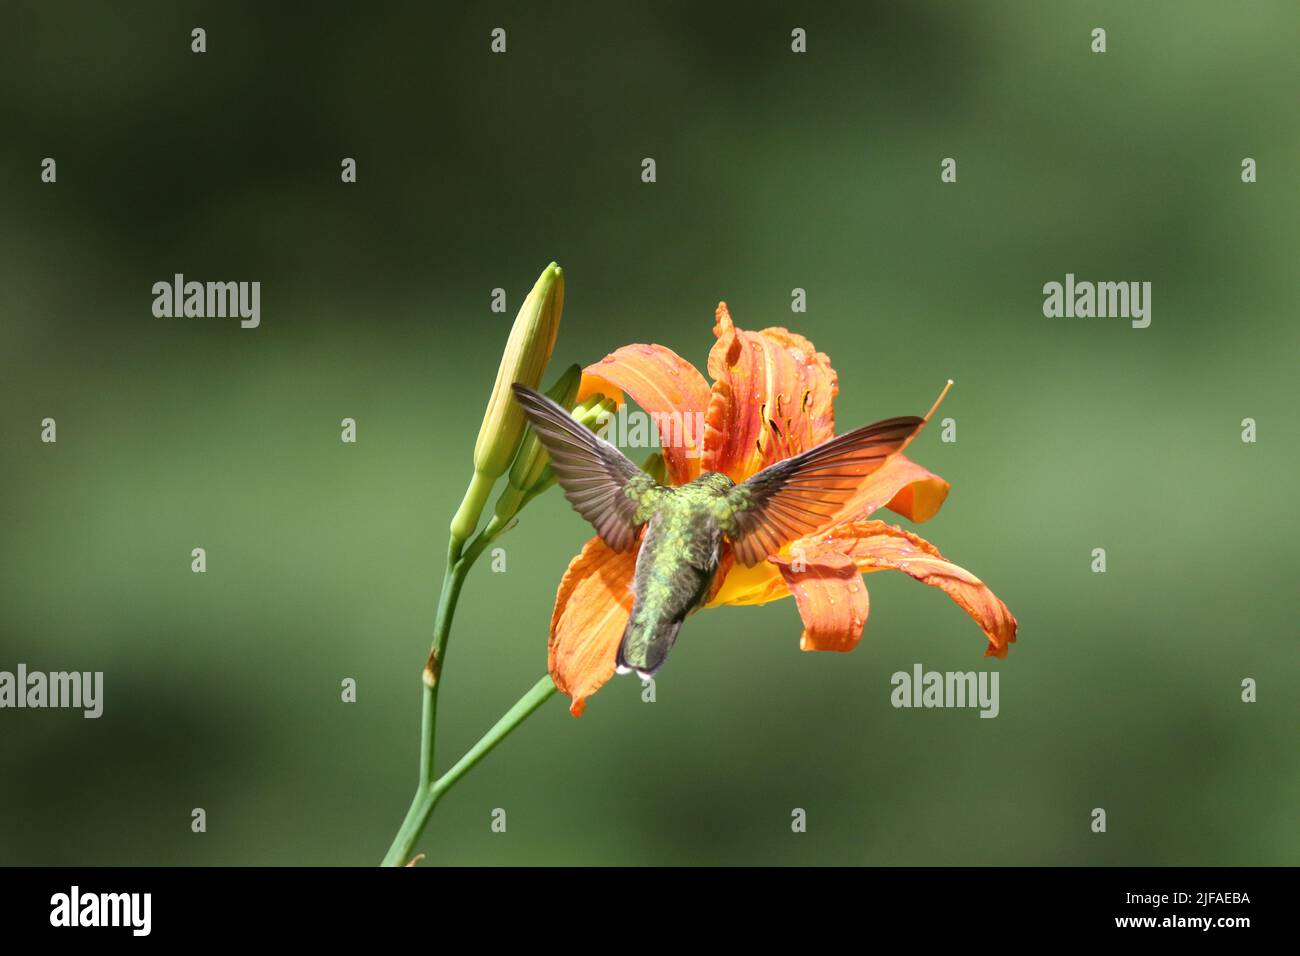 Ruby throated hummingbird Archilochus colubris visiting a lily flower to feed on sugary nectar Stock Photo